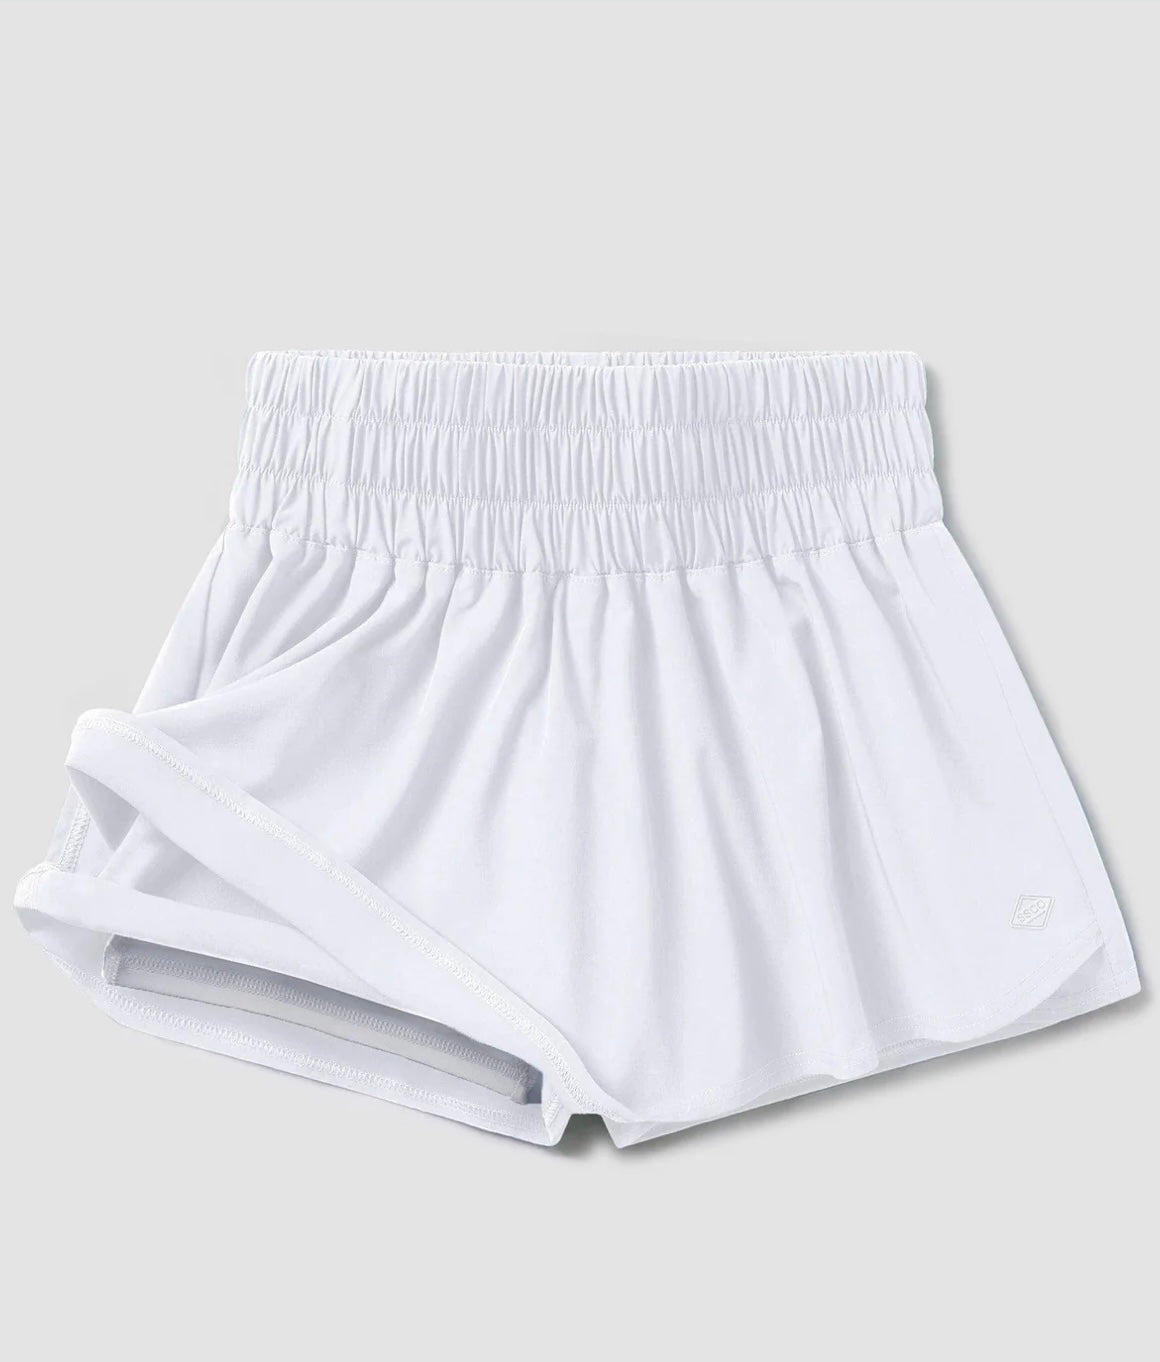 Women’s Hybrid Skort in Bright White by Southern Shirt Co.